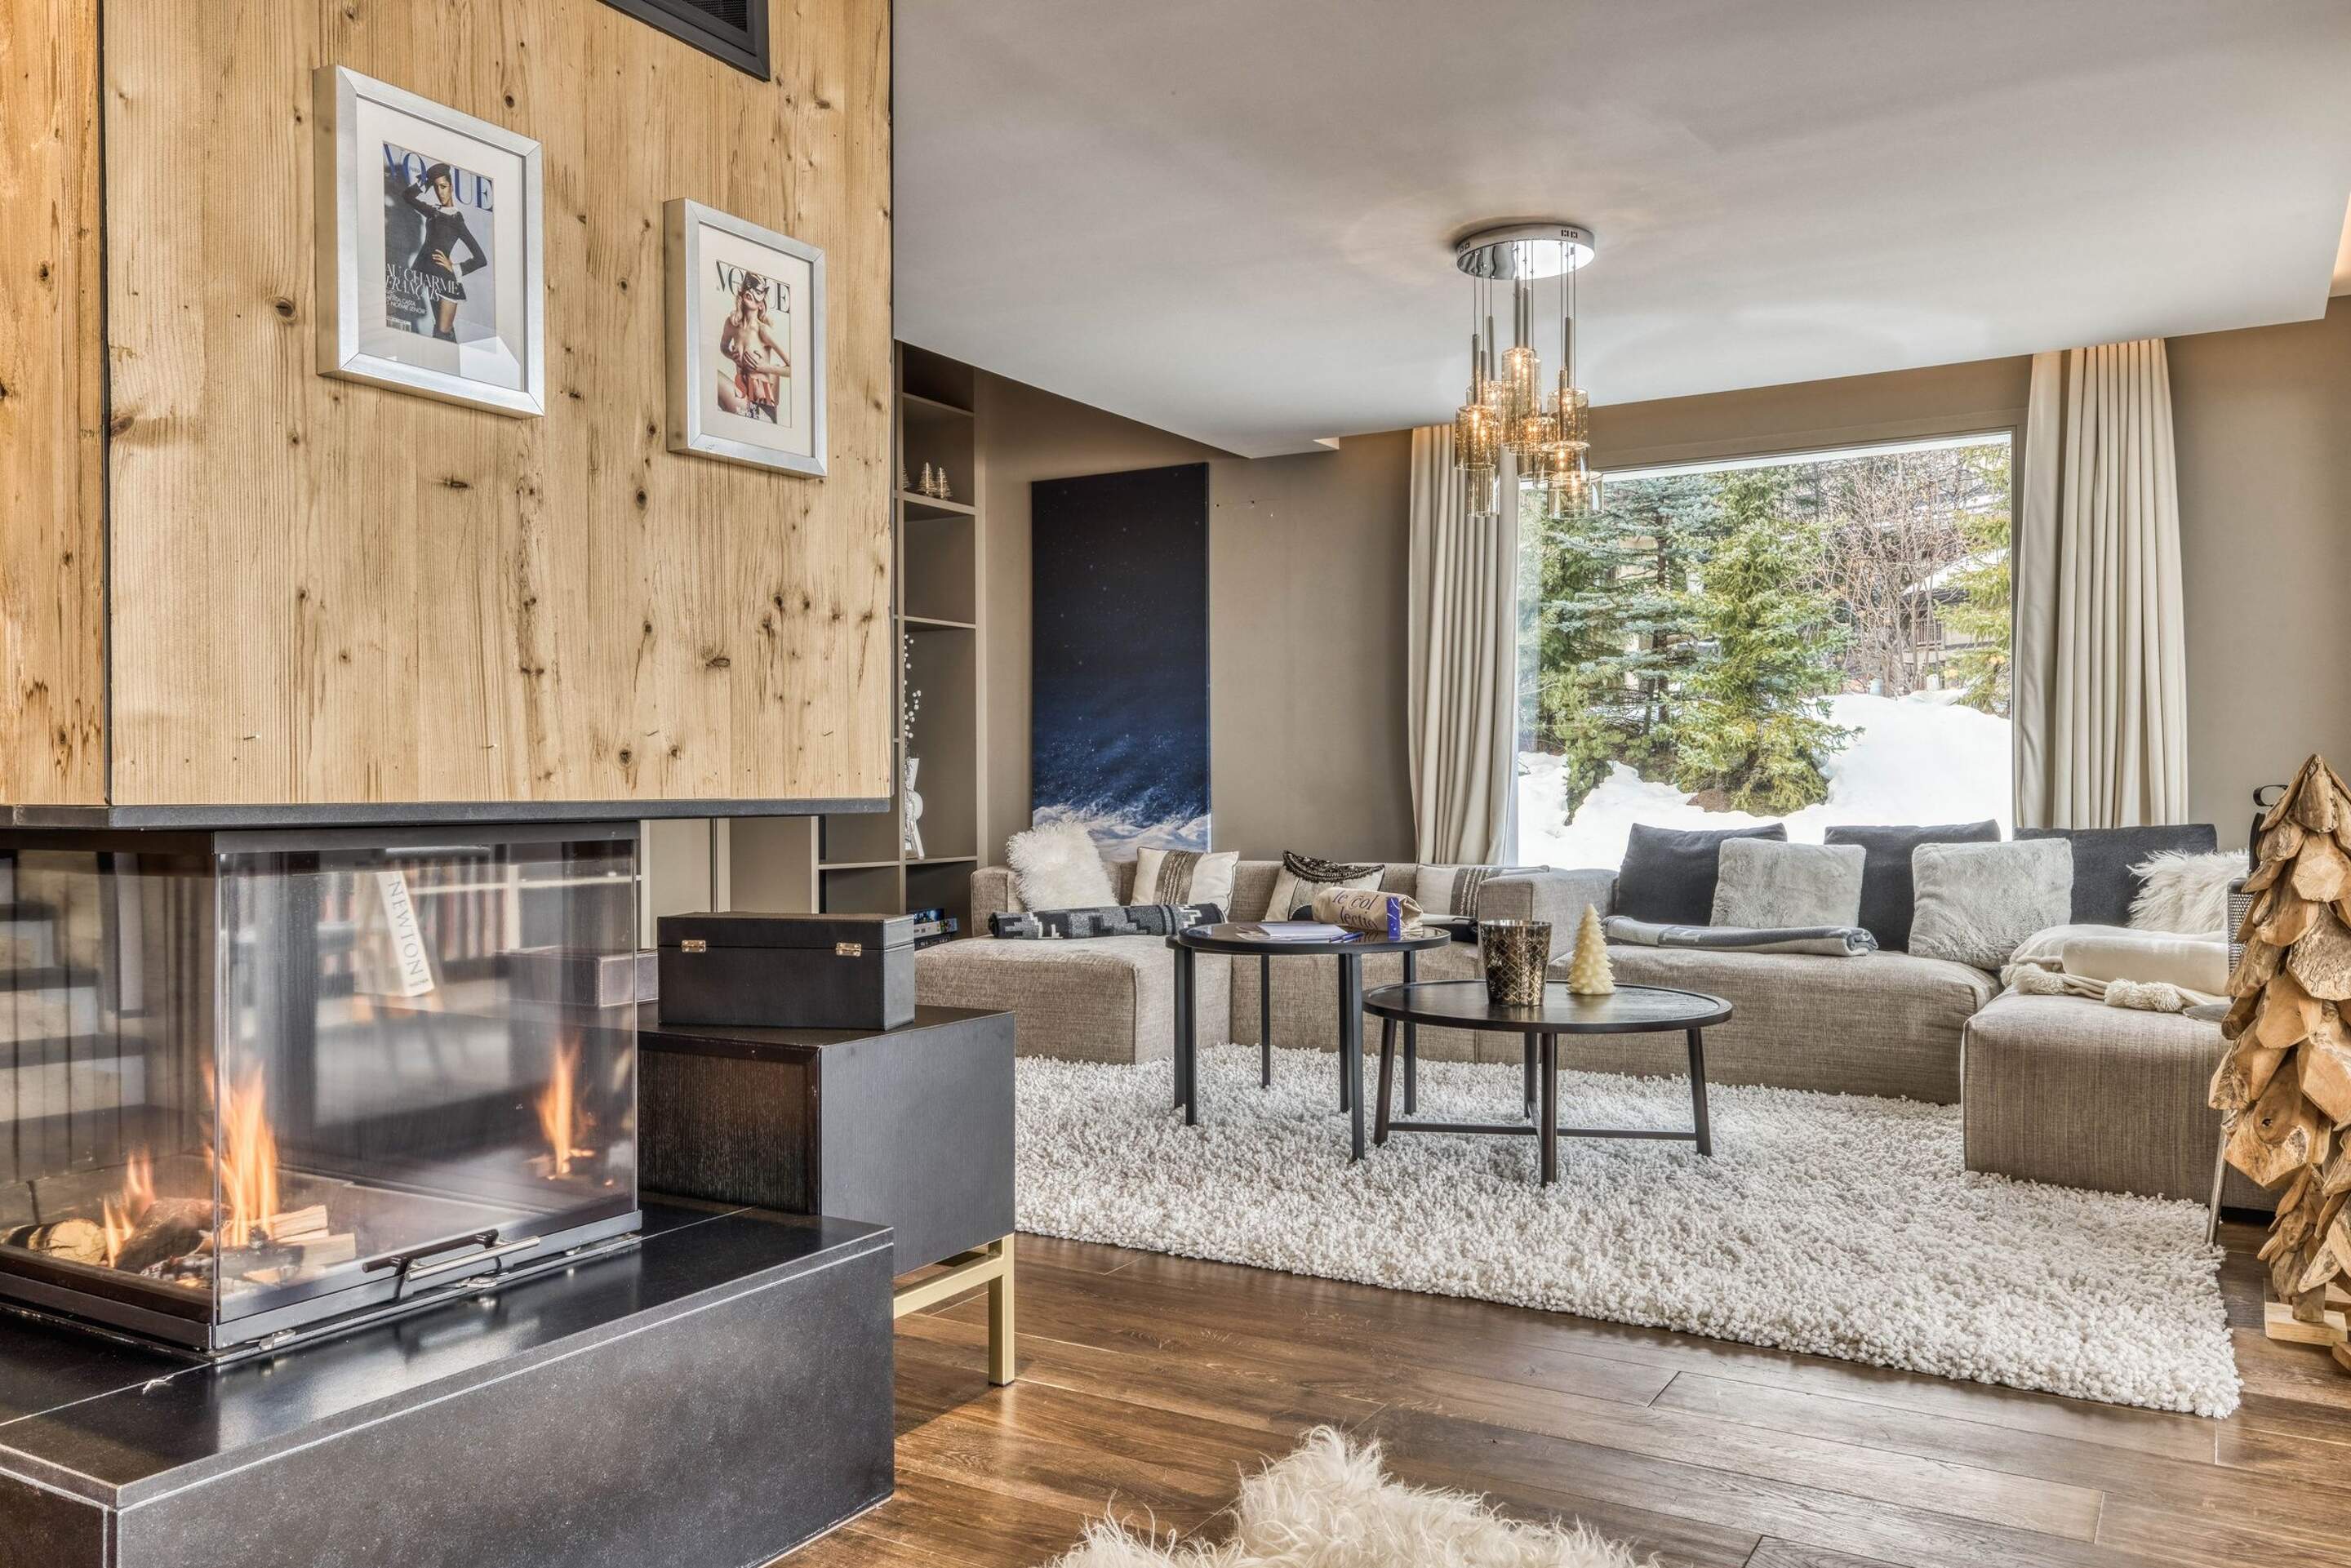 Chalet Edelweiss in Courchevel 1850 - Le Collectionist